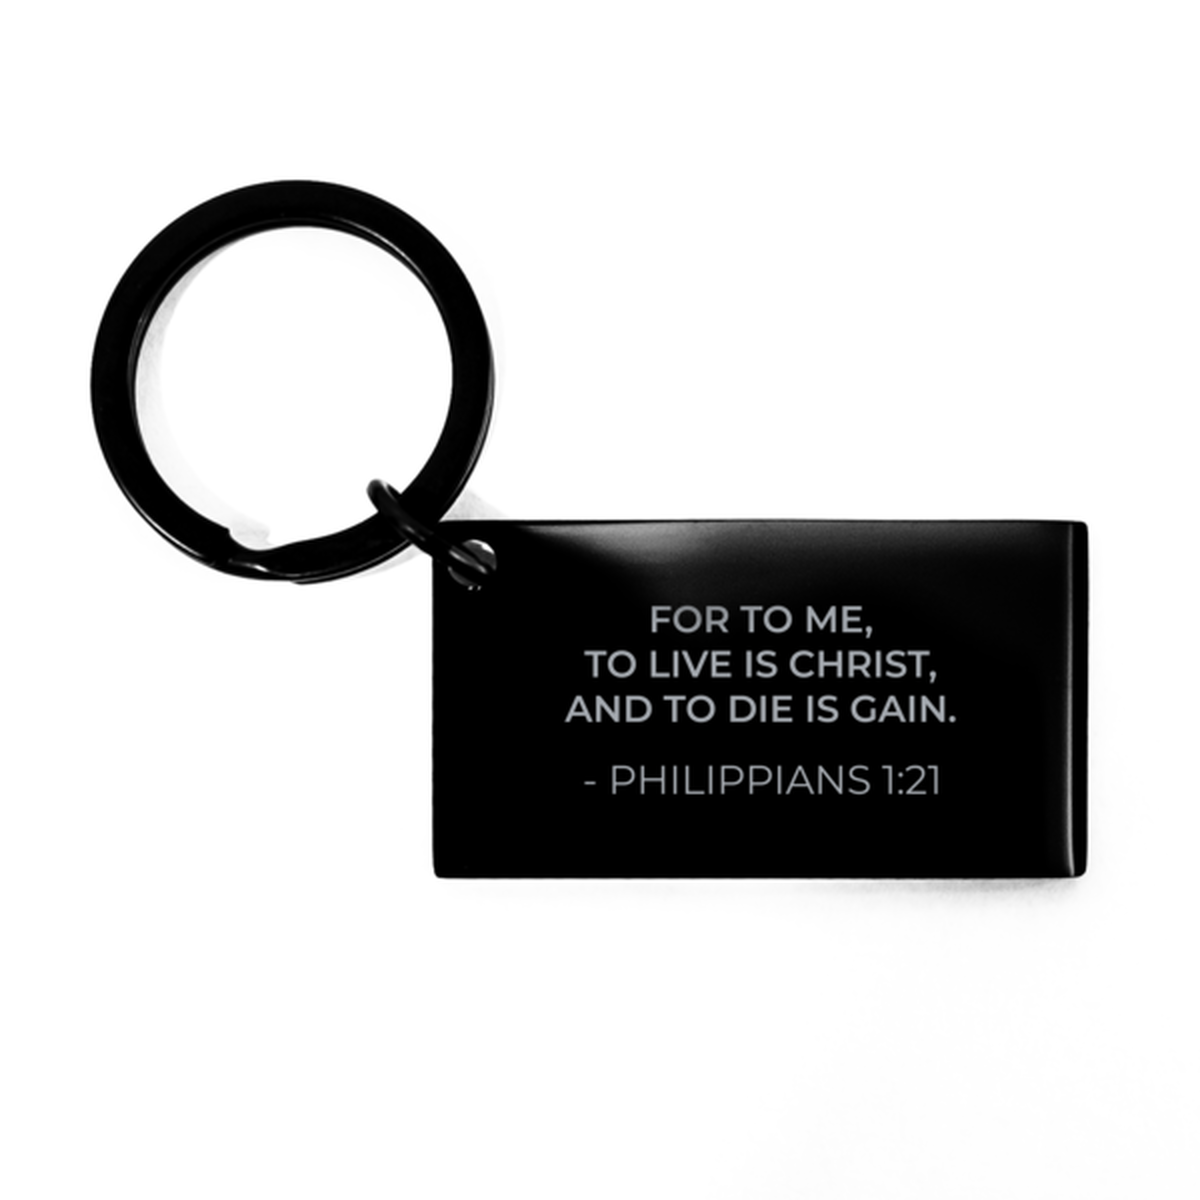 Bible Verse Black Keychain, Philippians 1:21 For To Me, To Live Is Christ, And To Die, Christian Inspirational Key Ring Gifts For Men Women